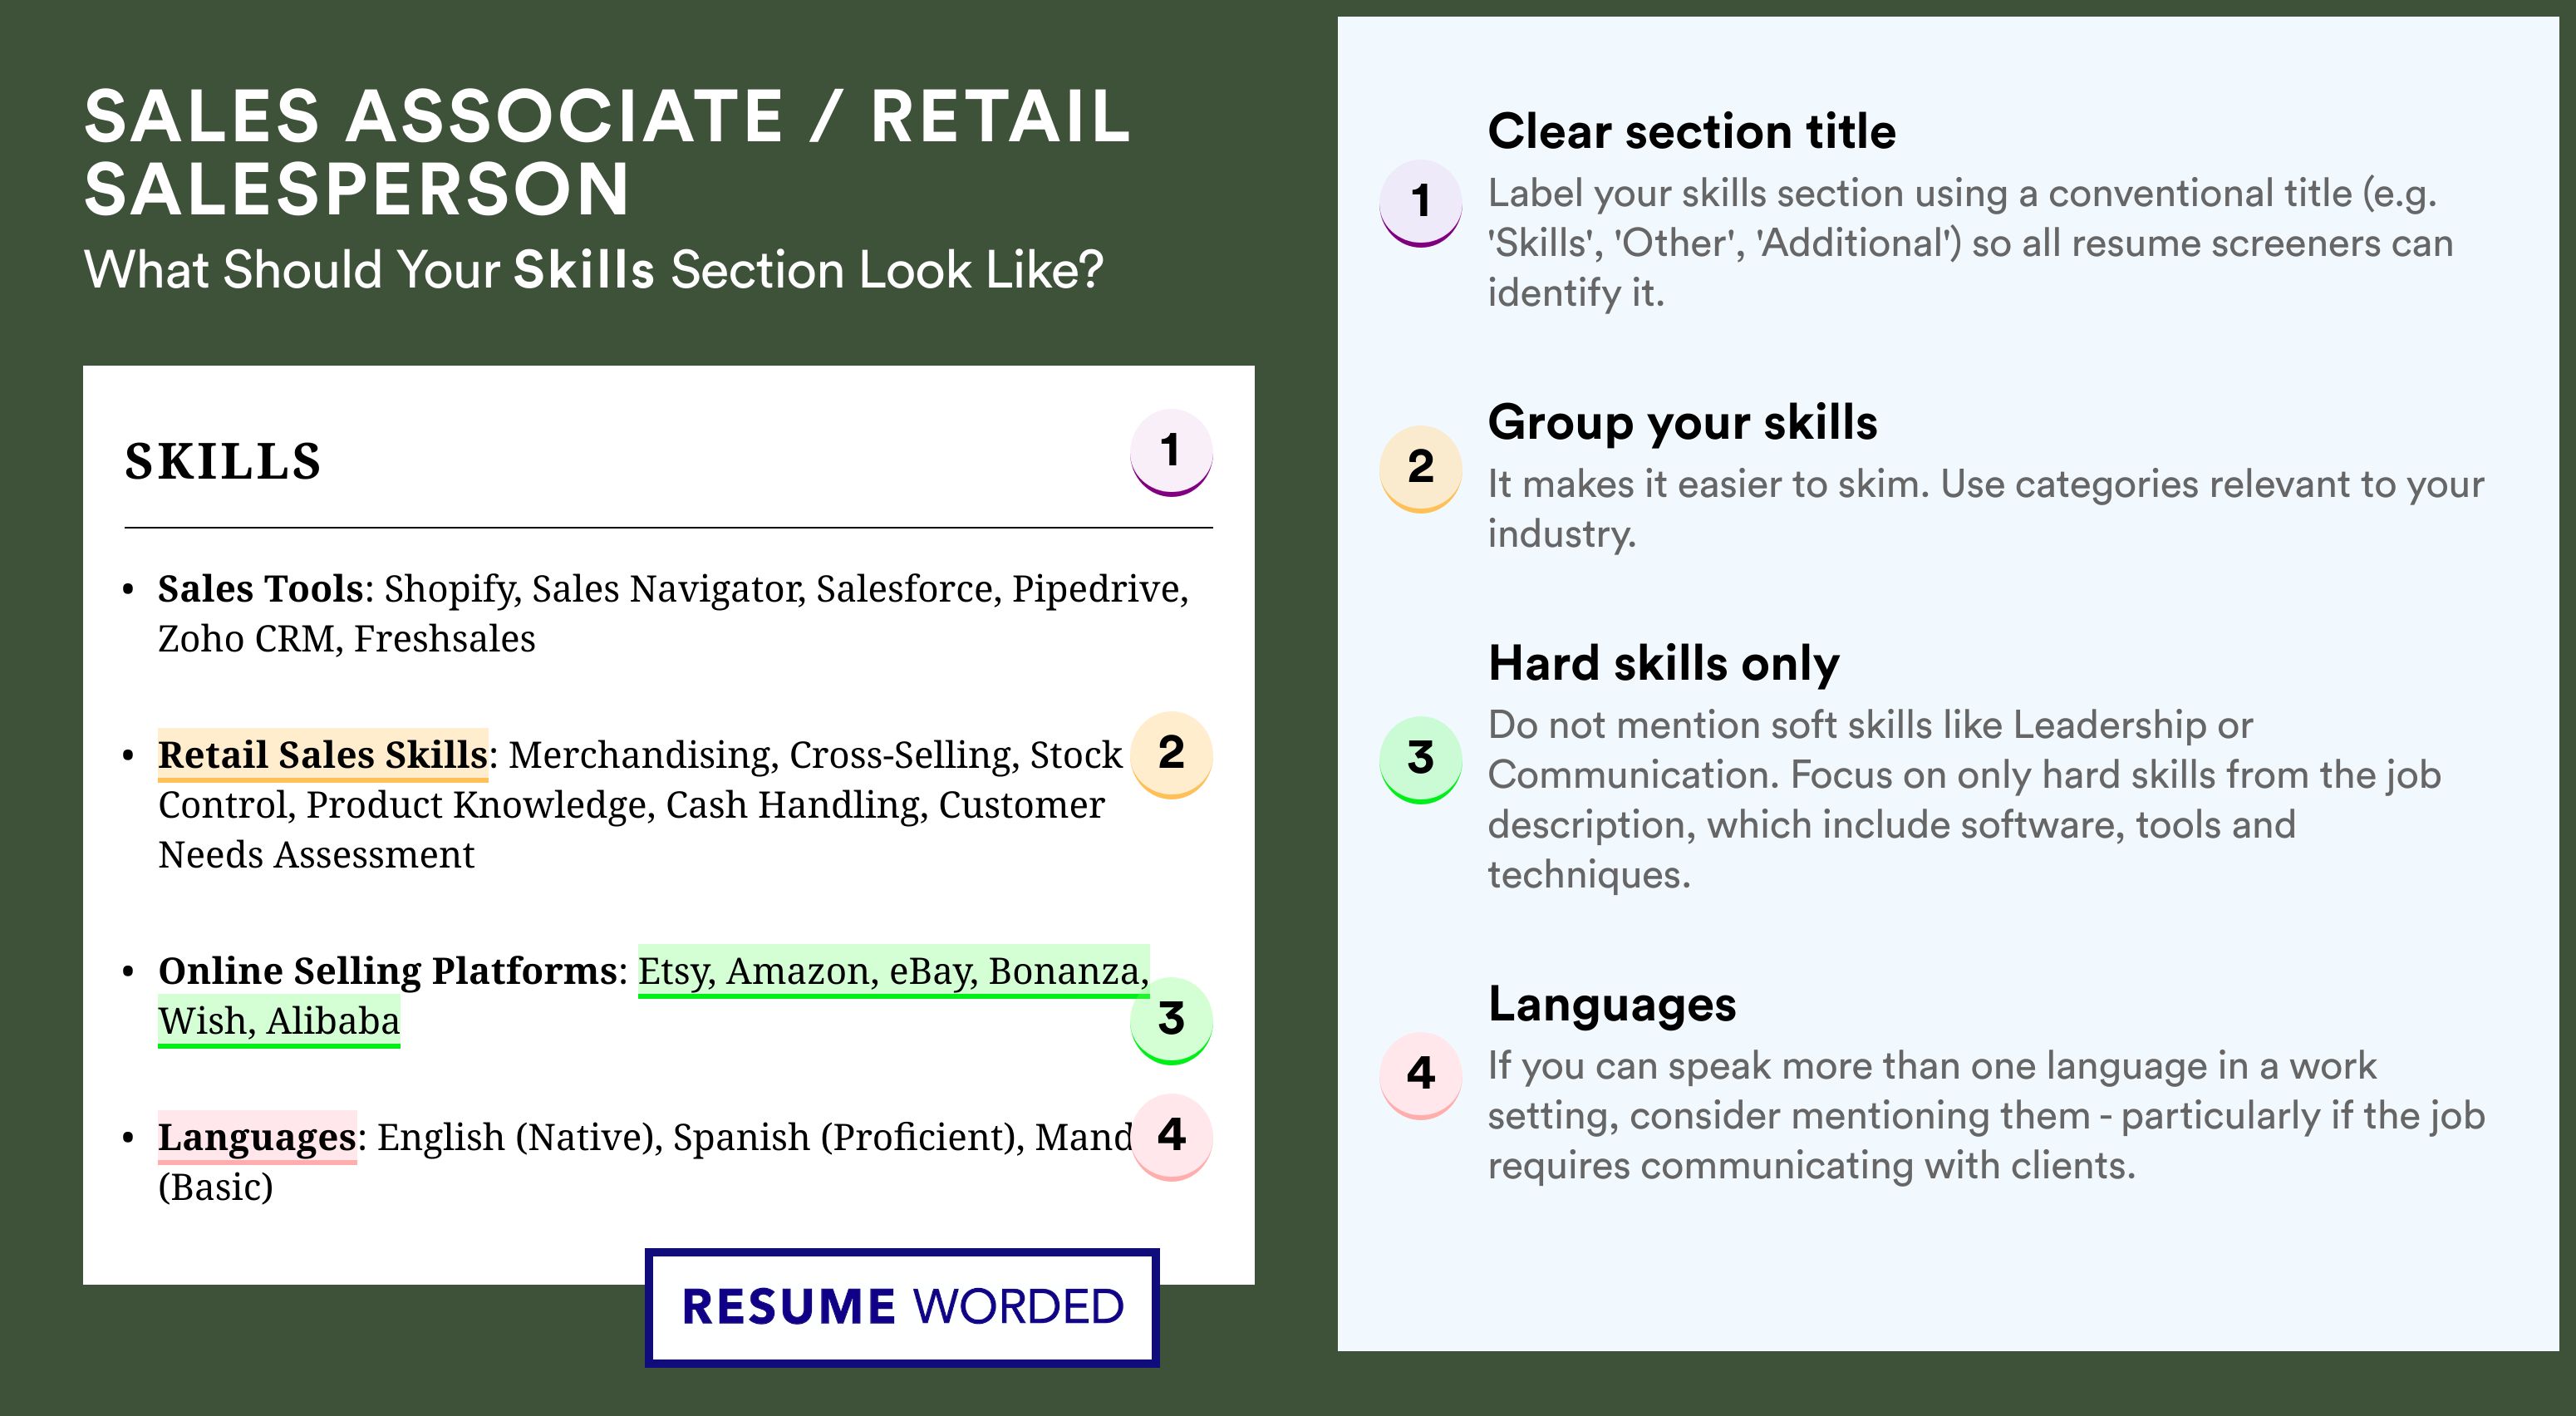 How To Write Your Skills Section - Sales Associate / Retail Salesperson Roles